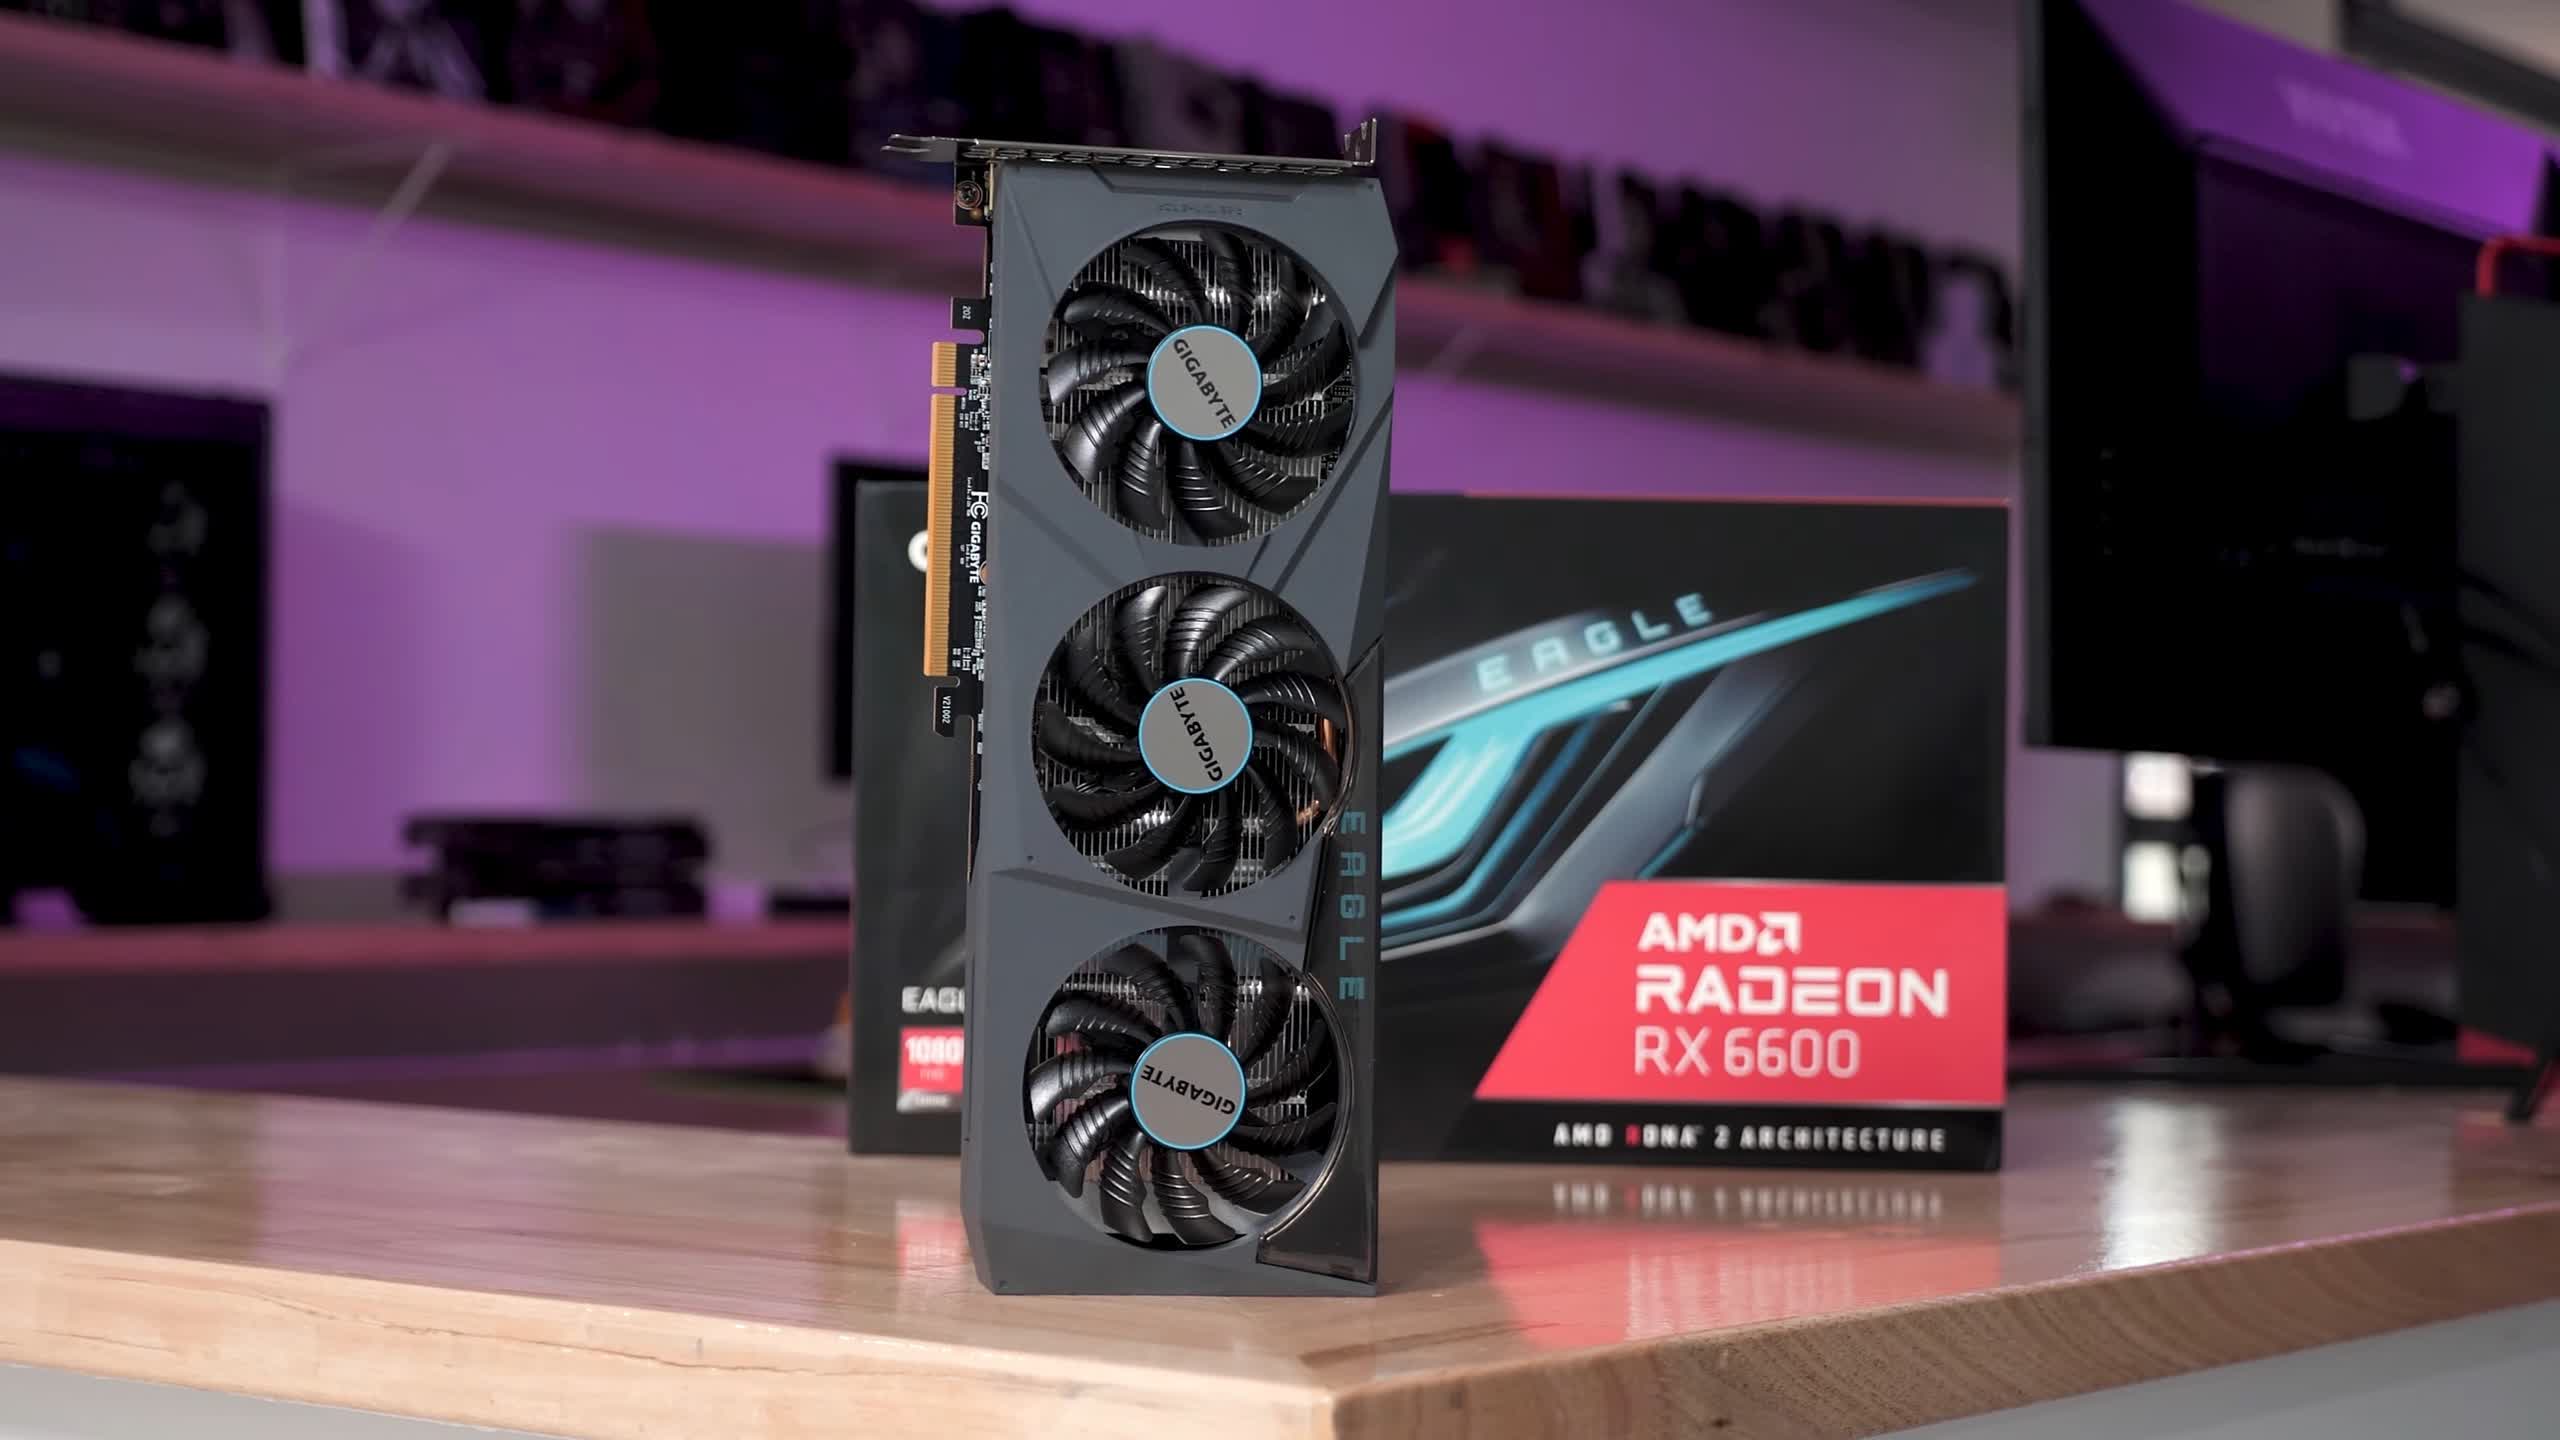 Gigabyte's Radeon RX 6000 cards will become up to $78 more expensive following AMD price hike